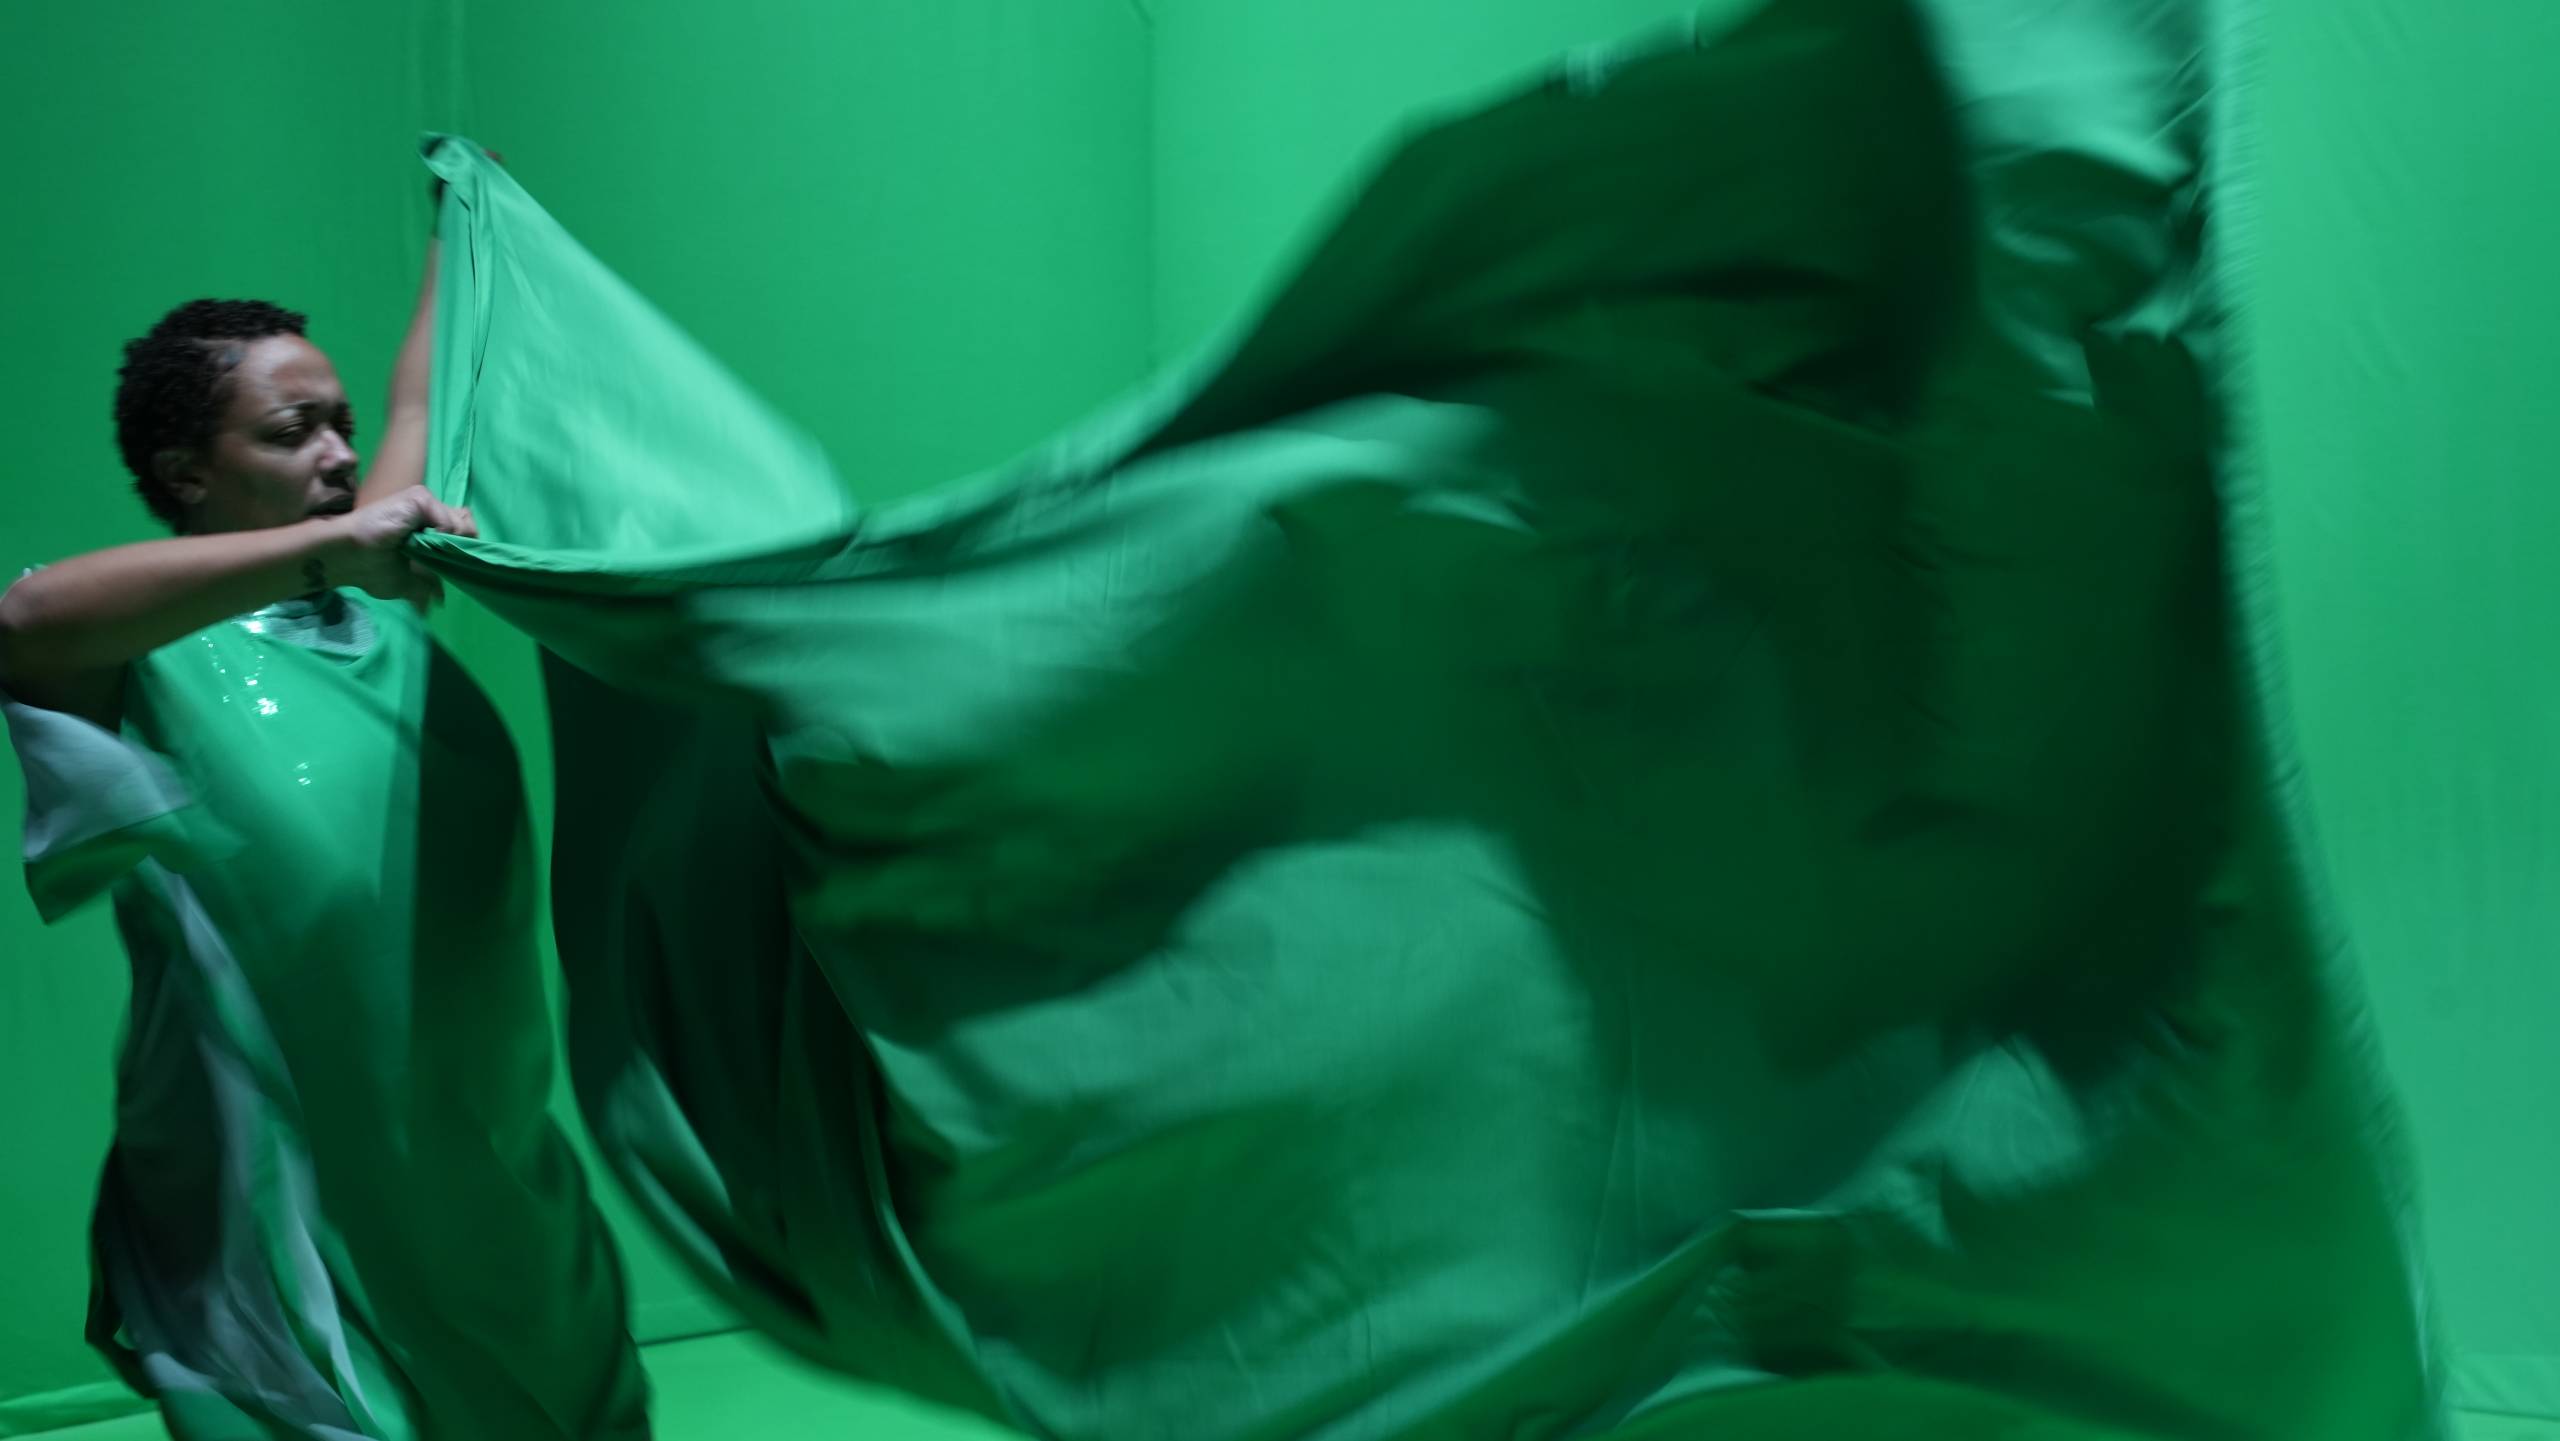 A performer in [siccer] waves green fabric as part of a performance.